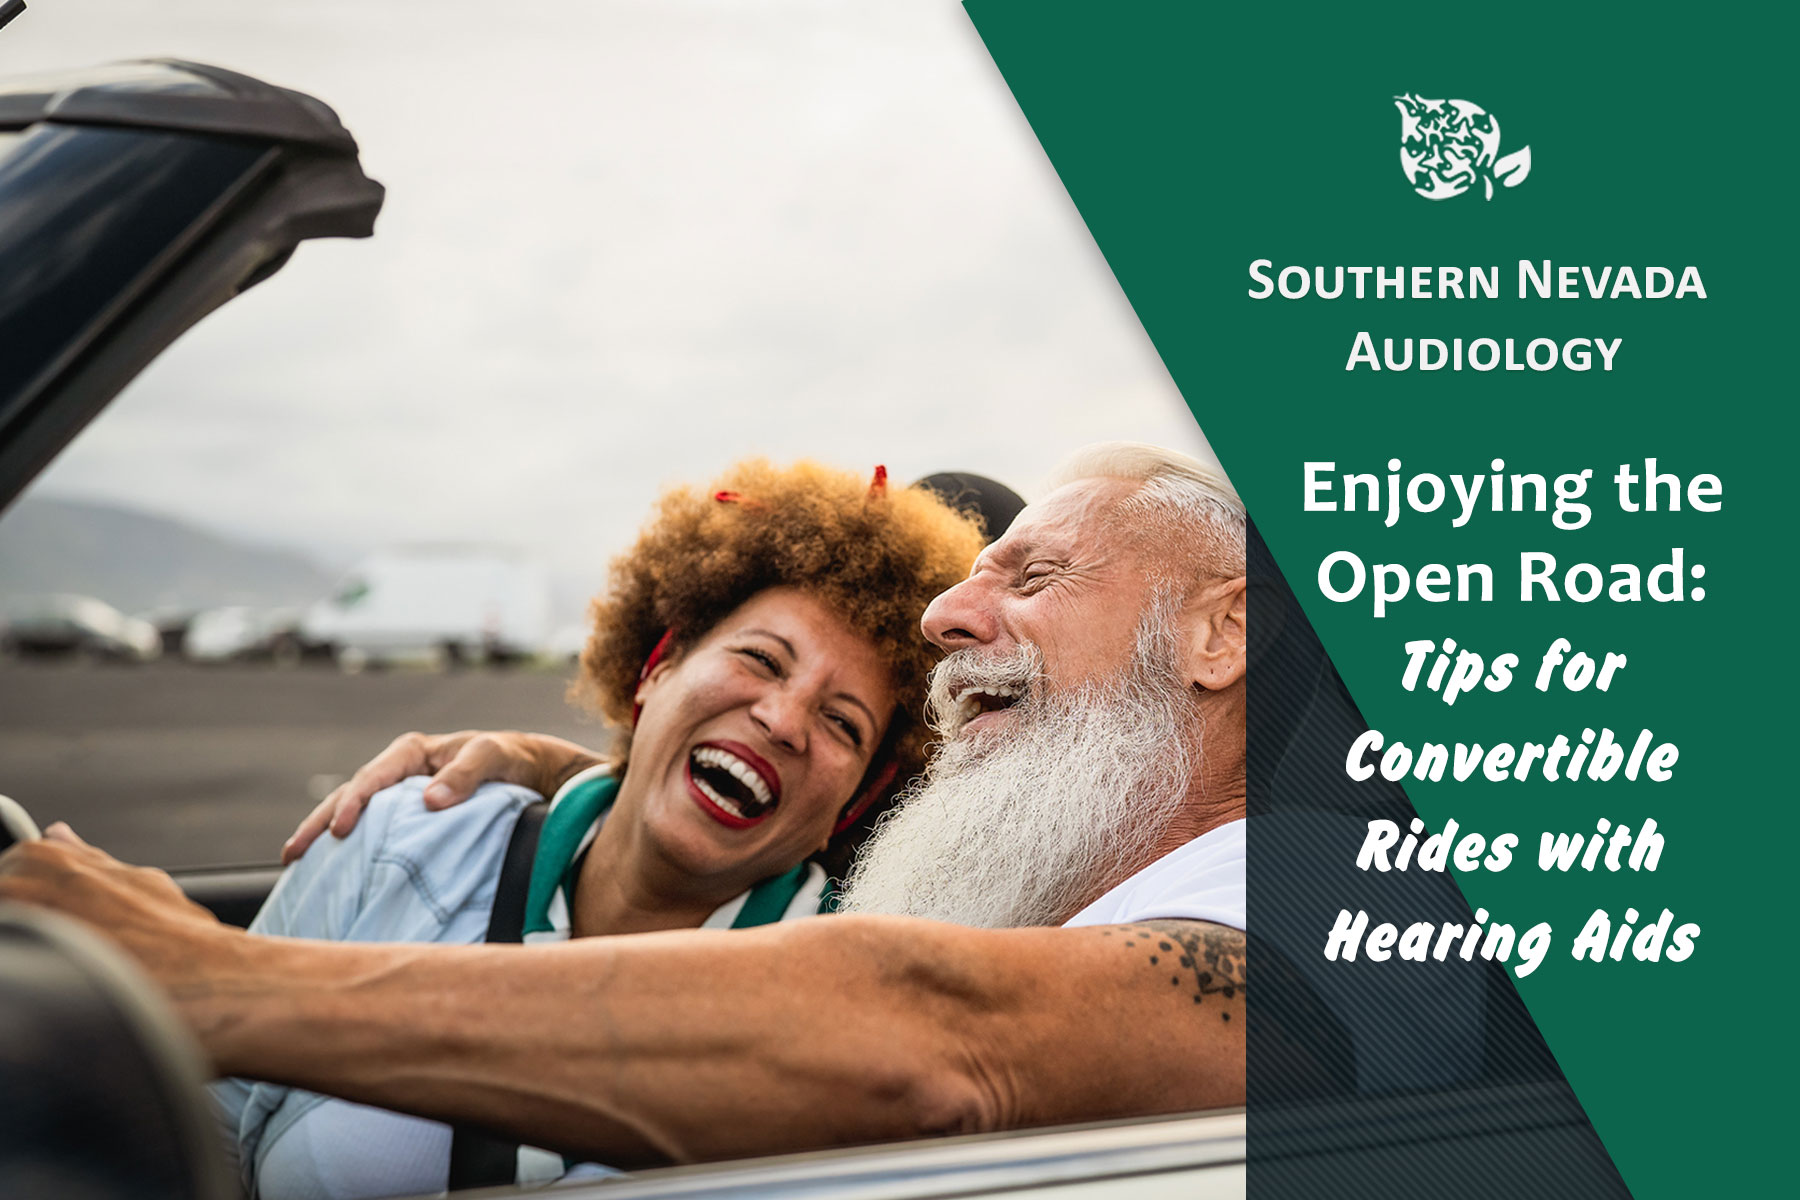 Enjoying the Open Road: Tips for Convertible Rides with Hearing Aids